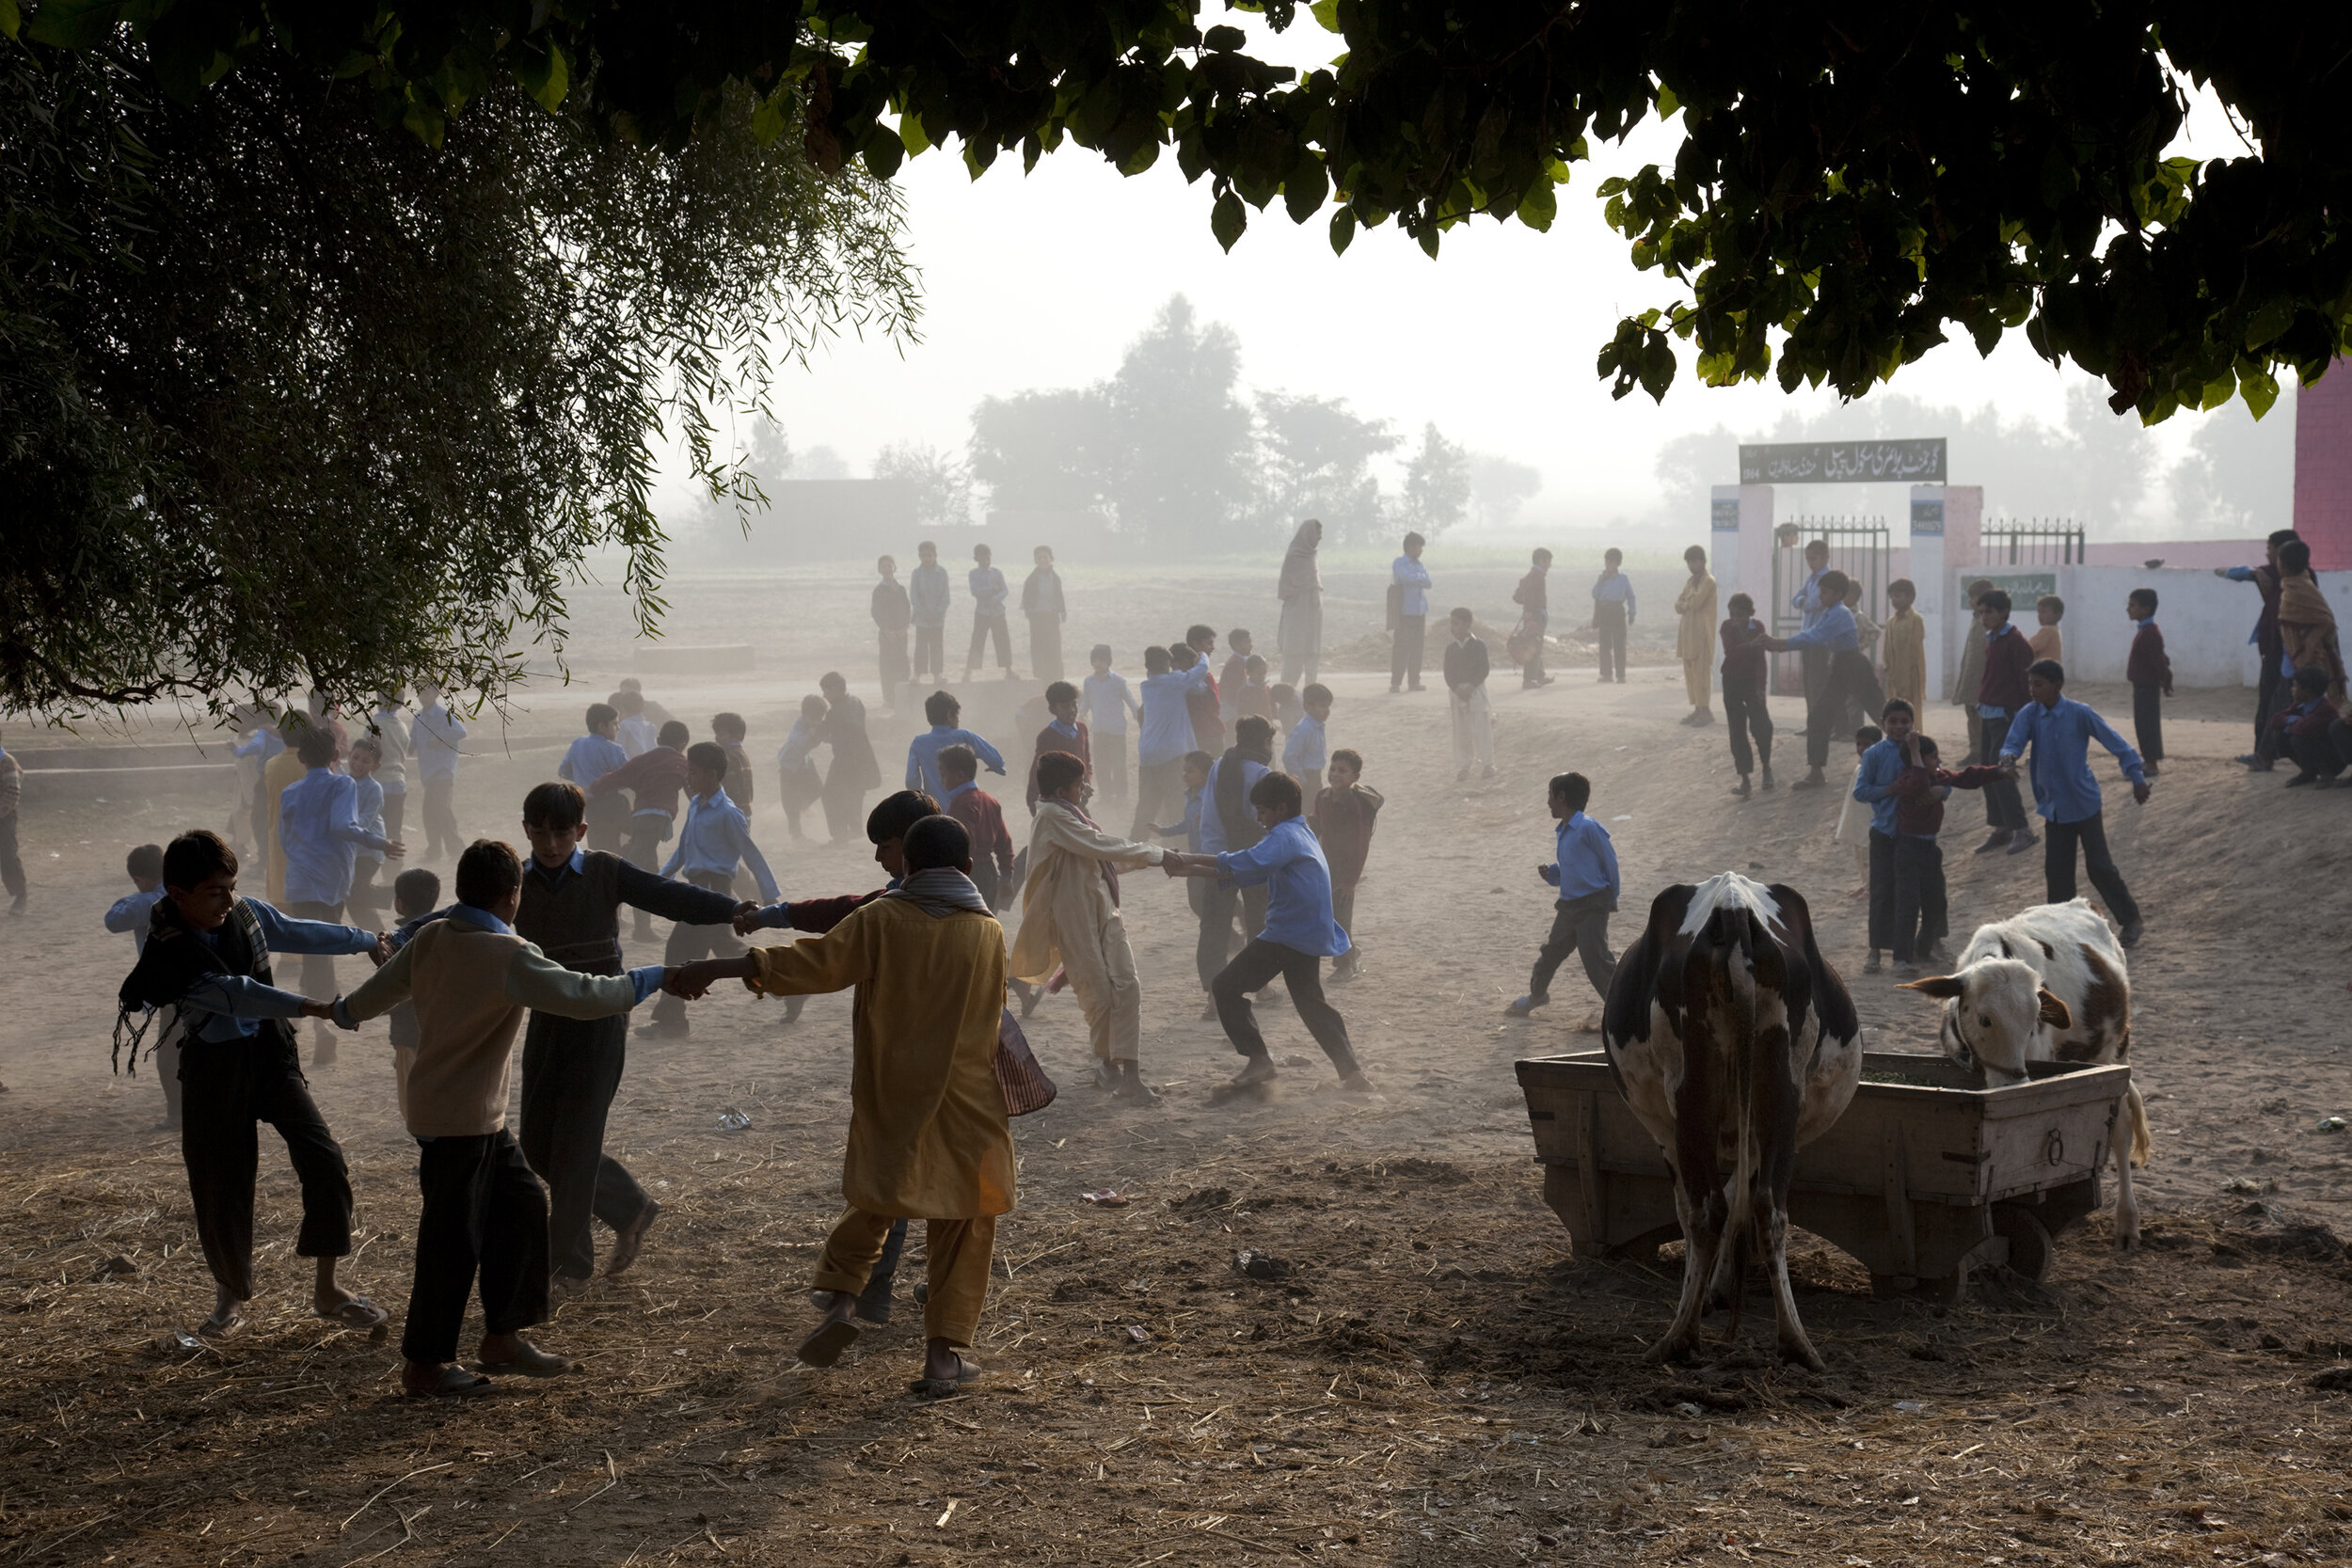  In the farming village of Pipli, schoolboys play outside their primary school before classes begin. Pakistan. 2009 